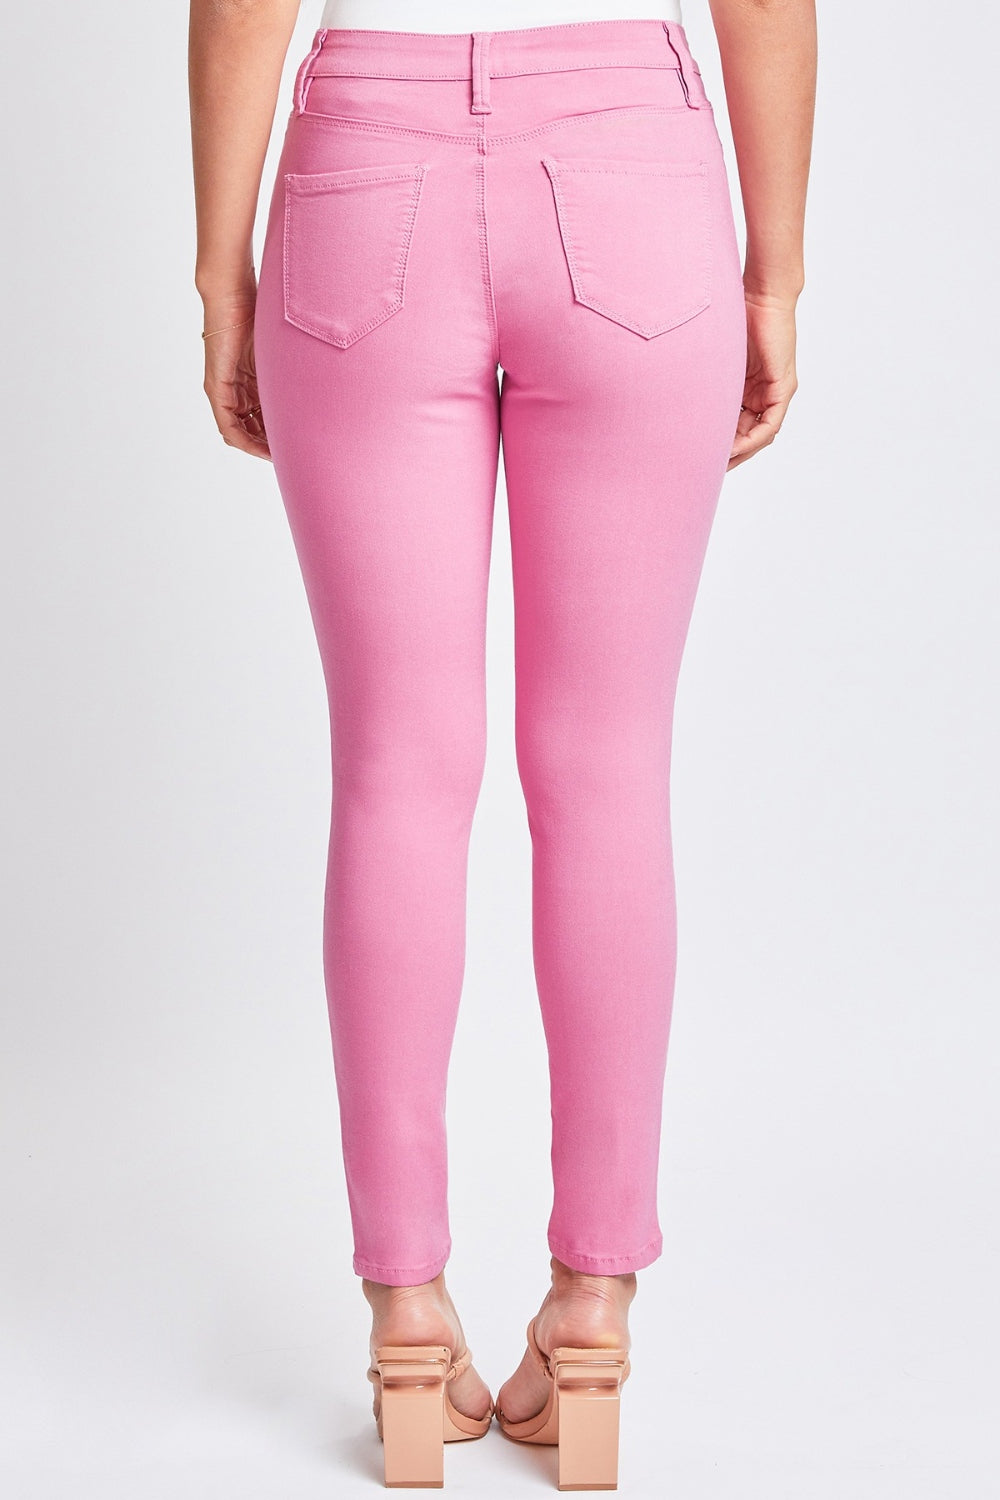 Quinn Hyperstretch Skinny Pants in Pink